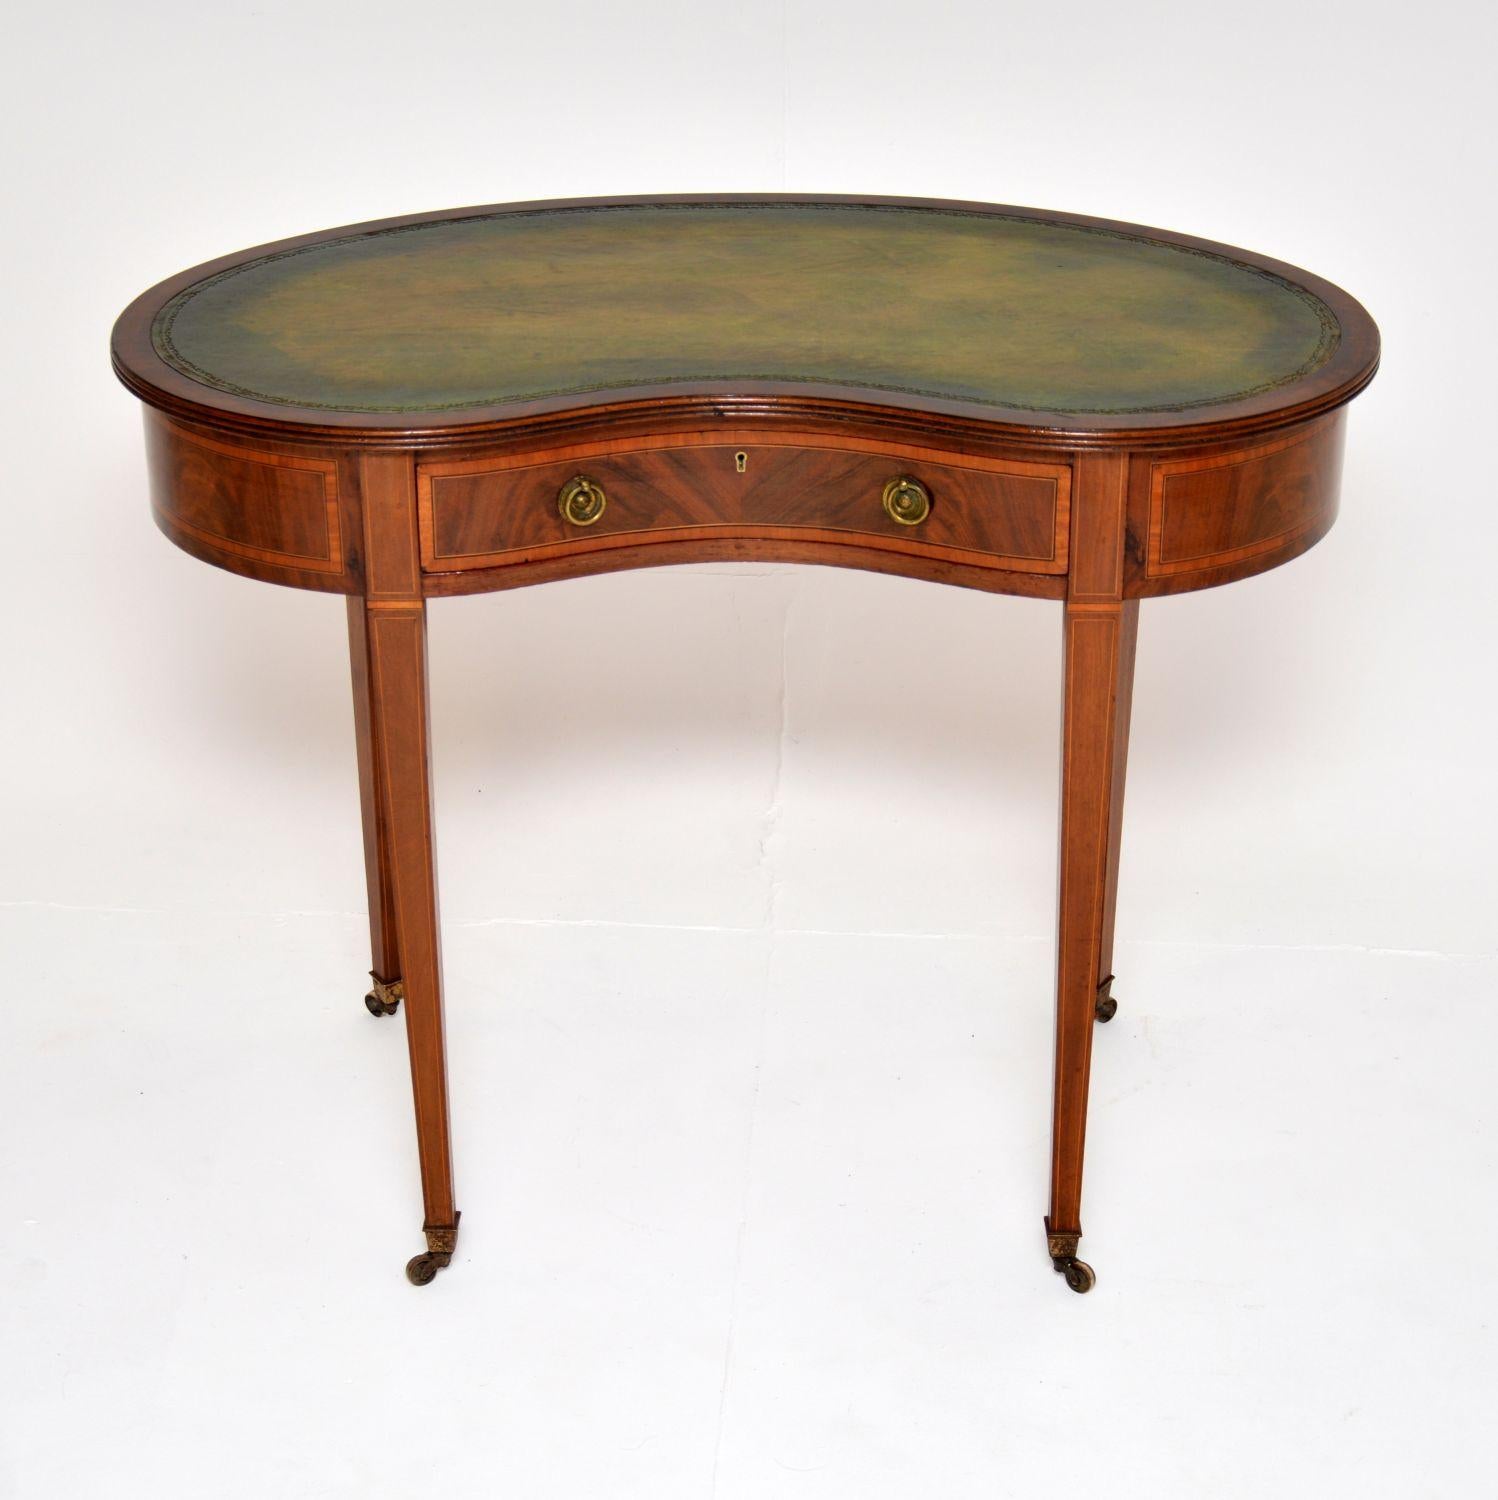 A beautiful and elegant antique Edwardian kidney shaped desk. This was made in England, it dates from the 1900-1910 period.

The quality is superb, this is very well made and it is a useful size. It is nicely polished on all sides, so can be used as